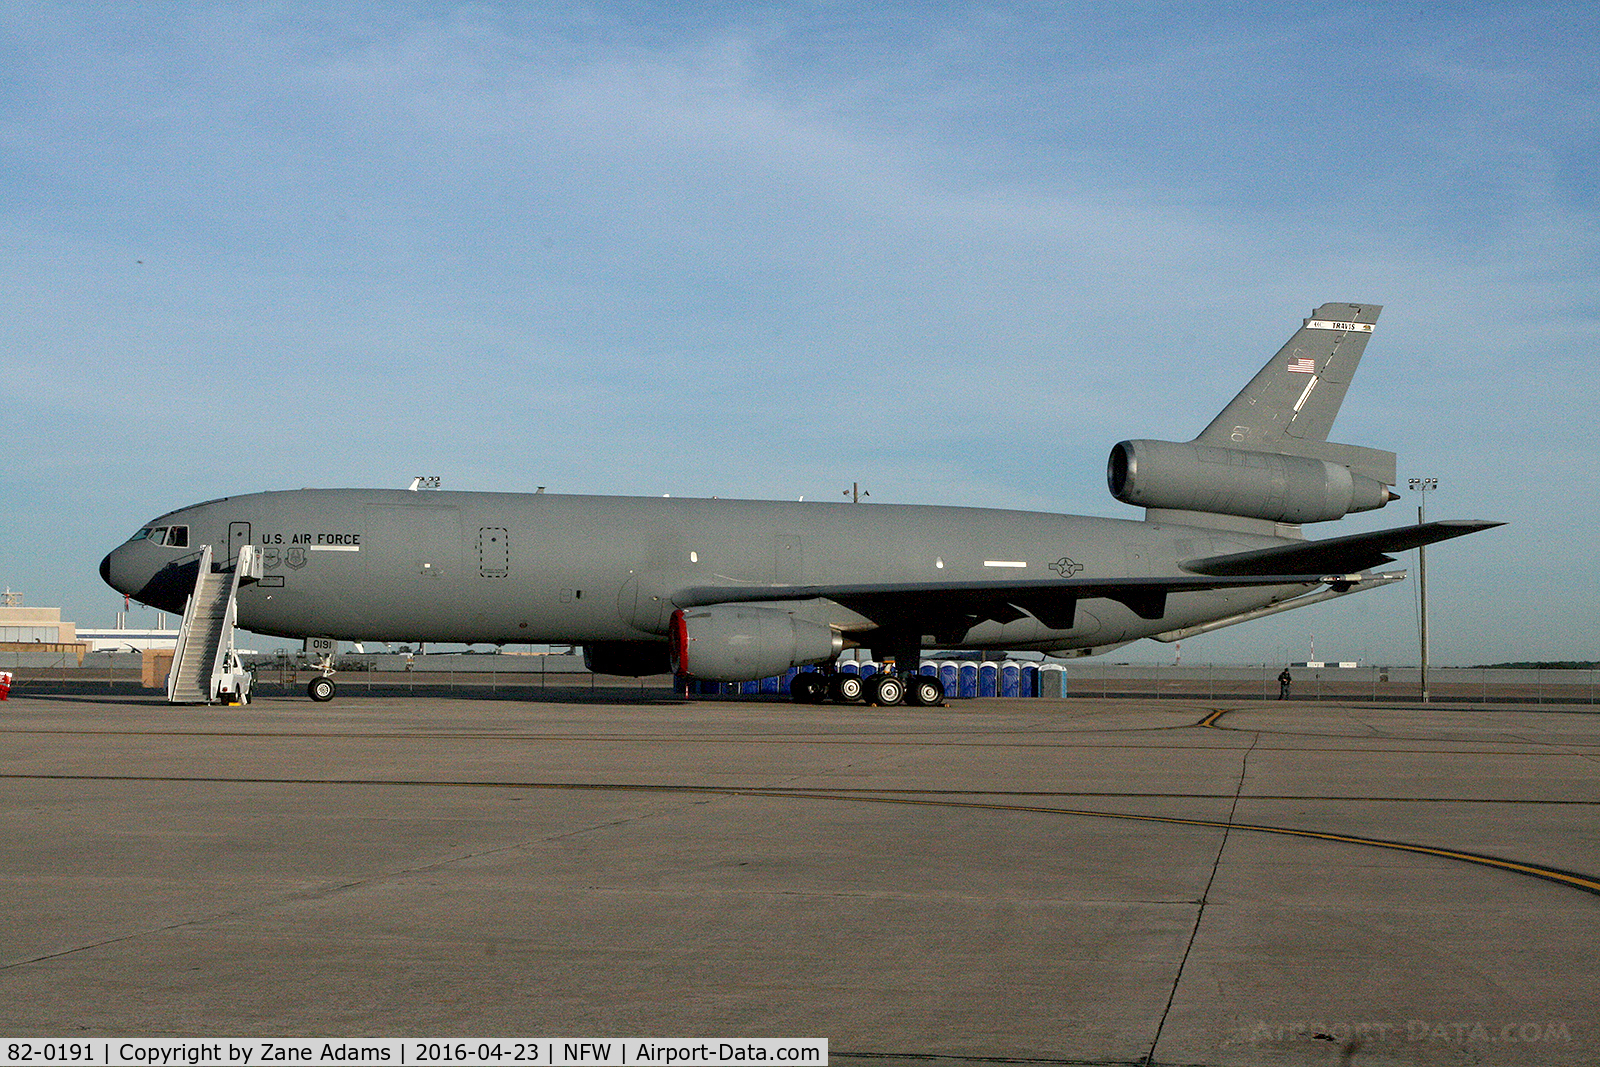 82-0191, 1983 McDonnell Douglas KC-10A Extender C/N 48213, At NAS Fort Worth